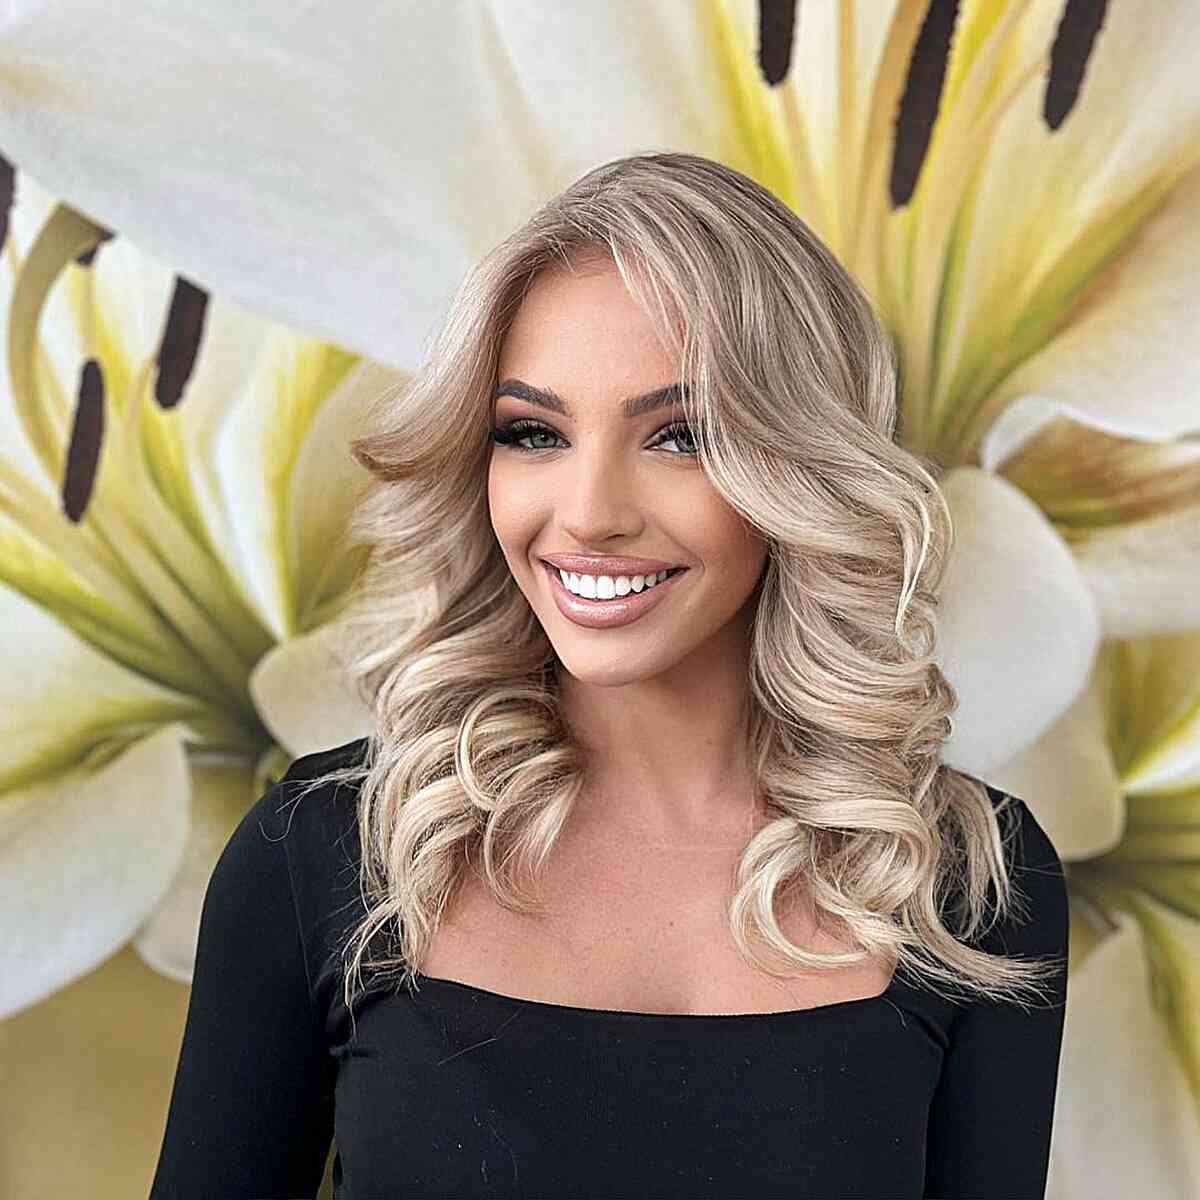 Simple Big Barrel Curls on Mid-Length Hair for women with an elegant style